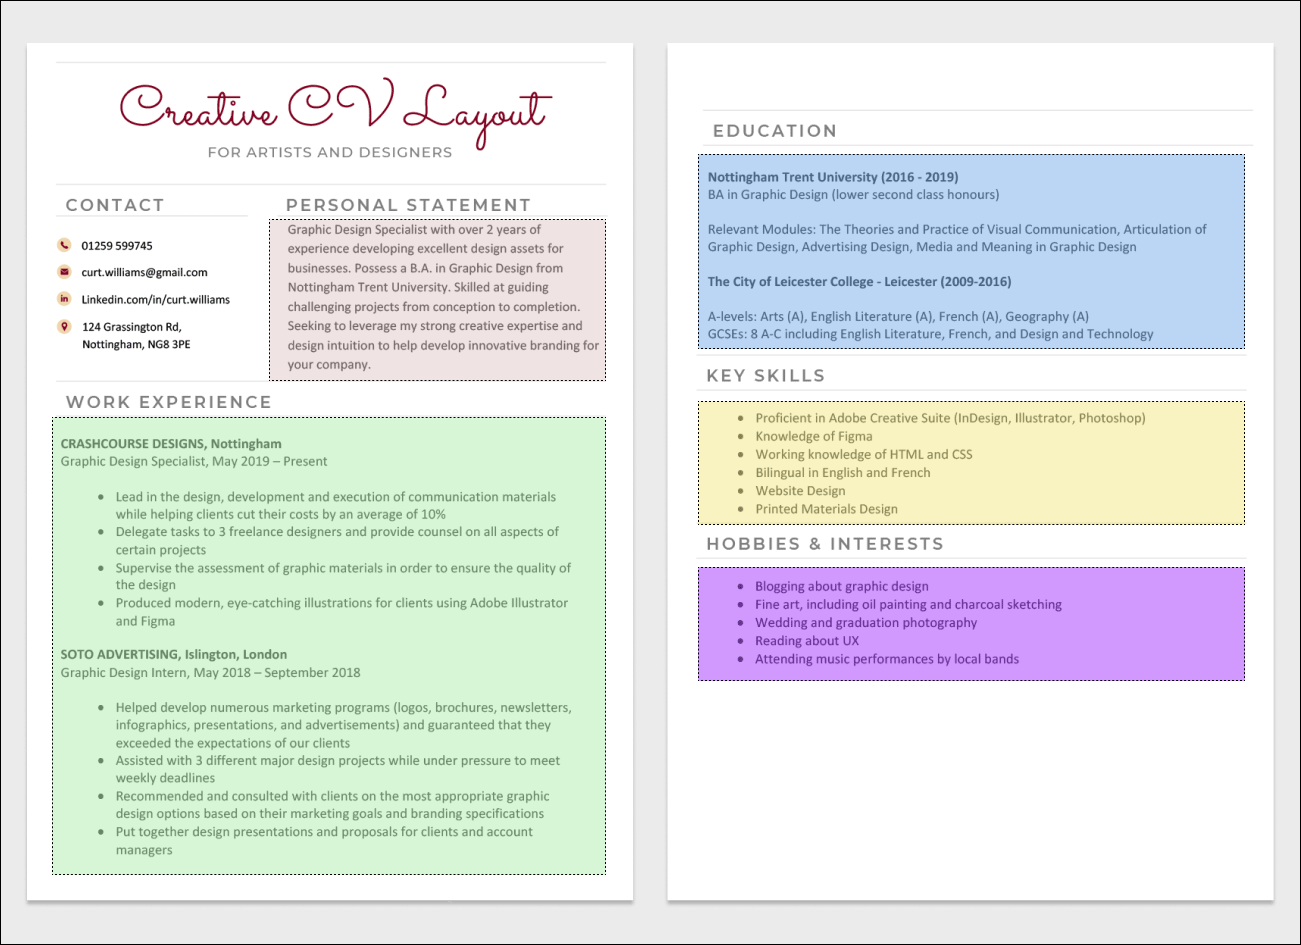 An example of a two-page CV displayed side-by-side with its CV sections highlighted by colored boxes on a light grey background to illustrate a creative CV layout